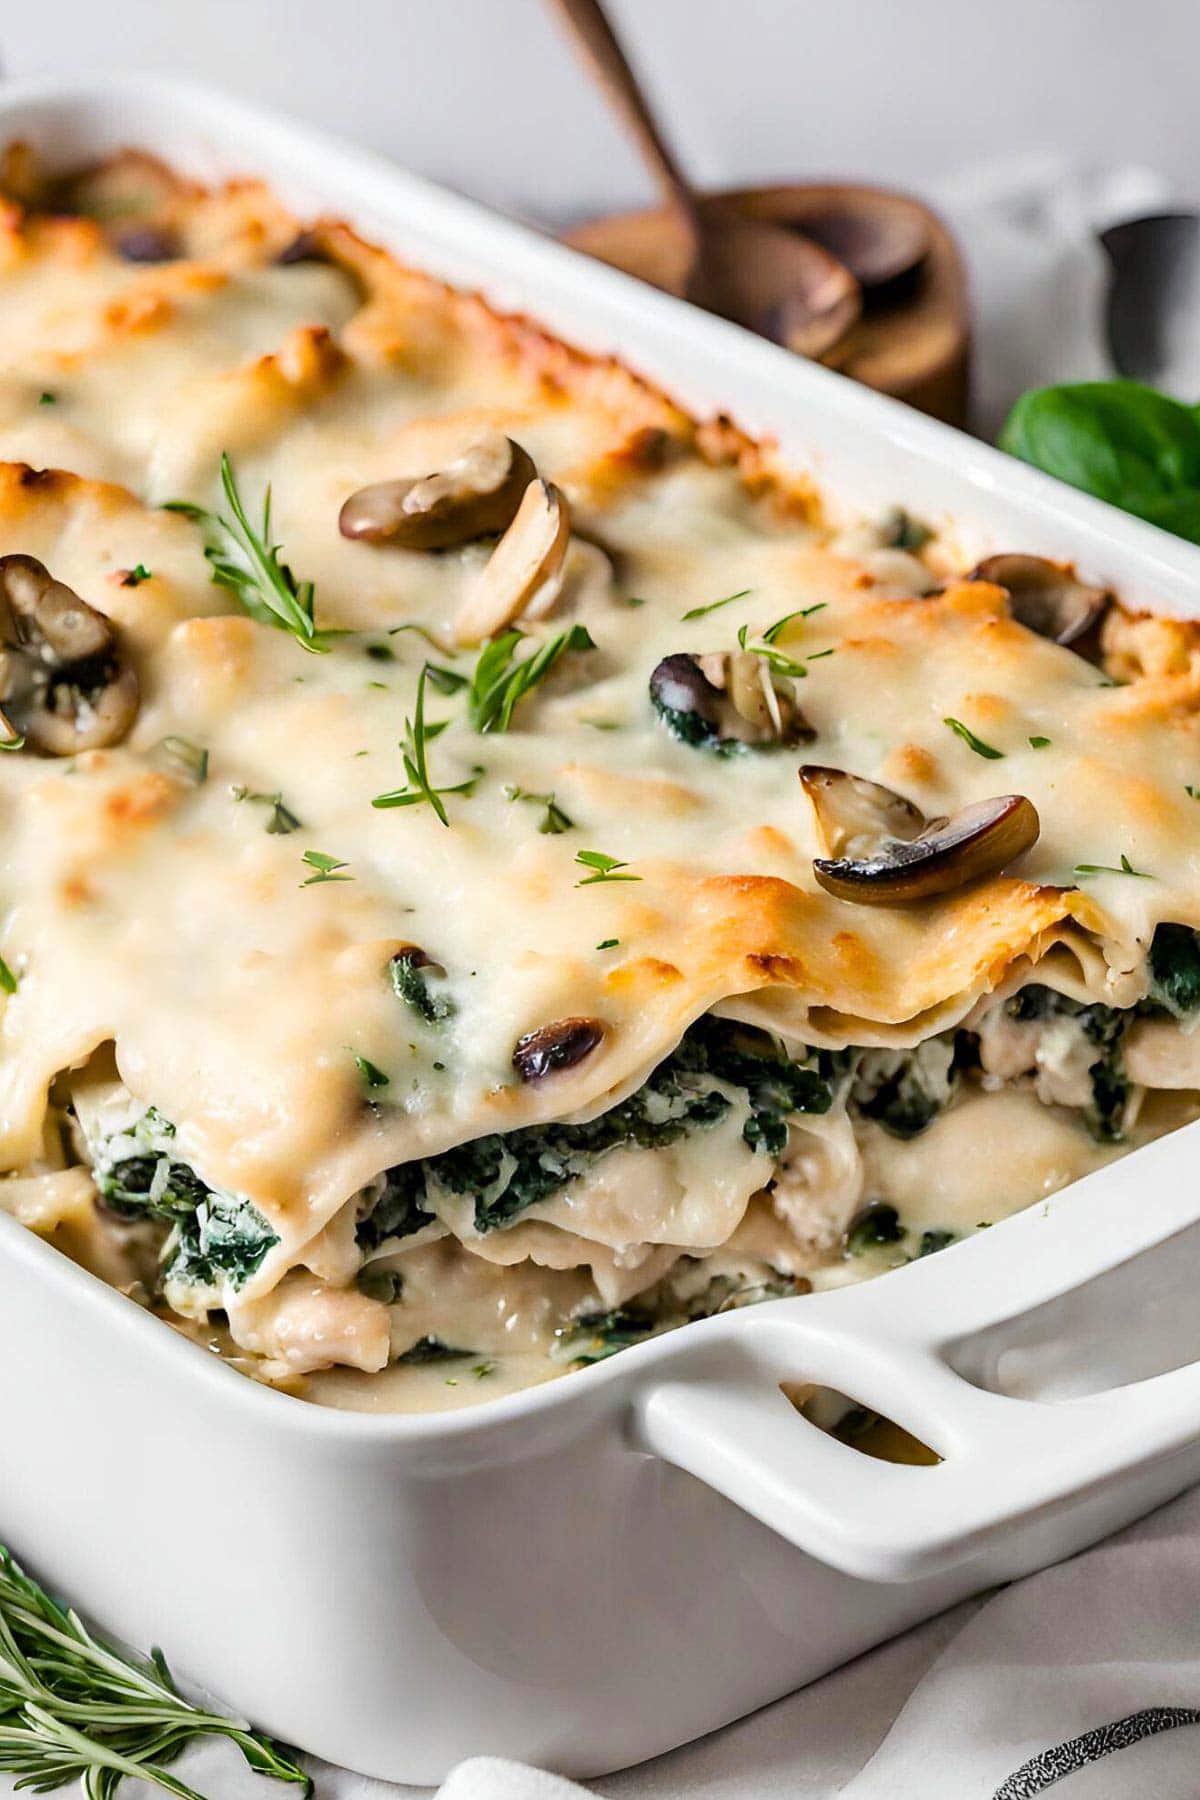 This creamy chicken lasagna is cozy and comforting perfect for chilly winter nights. It's made with chicken, mushrooms spinach and rosemary in a creamy bechamel sauce. It can easily be made vegetarian- just leave out the chicken and double the mushrooms! 